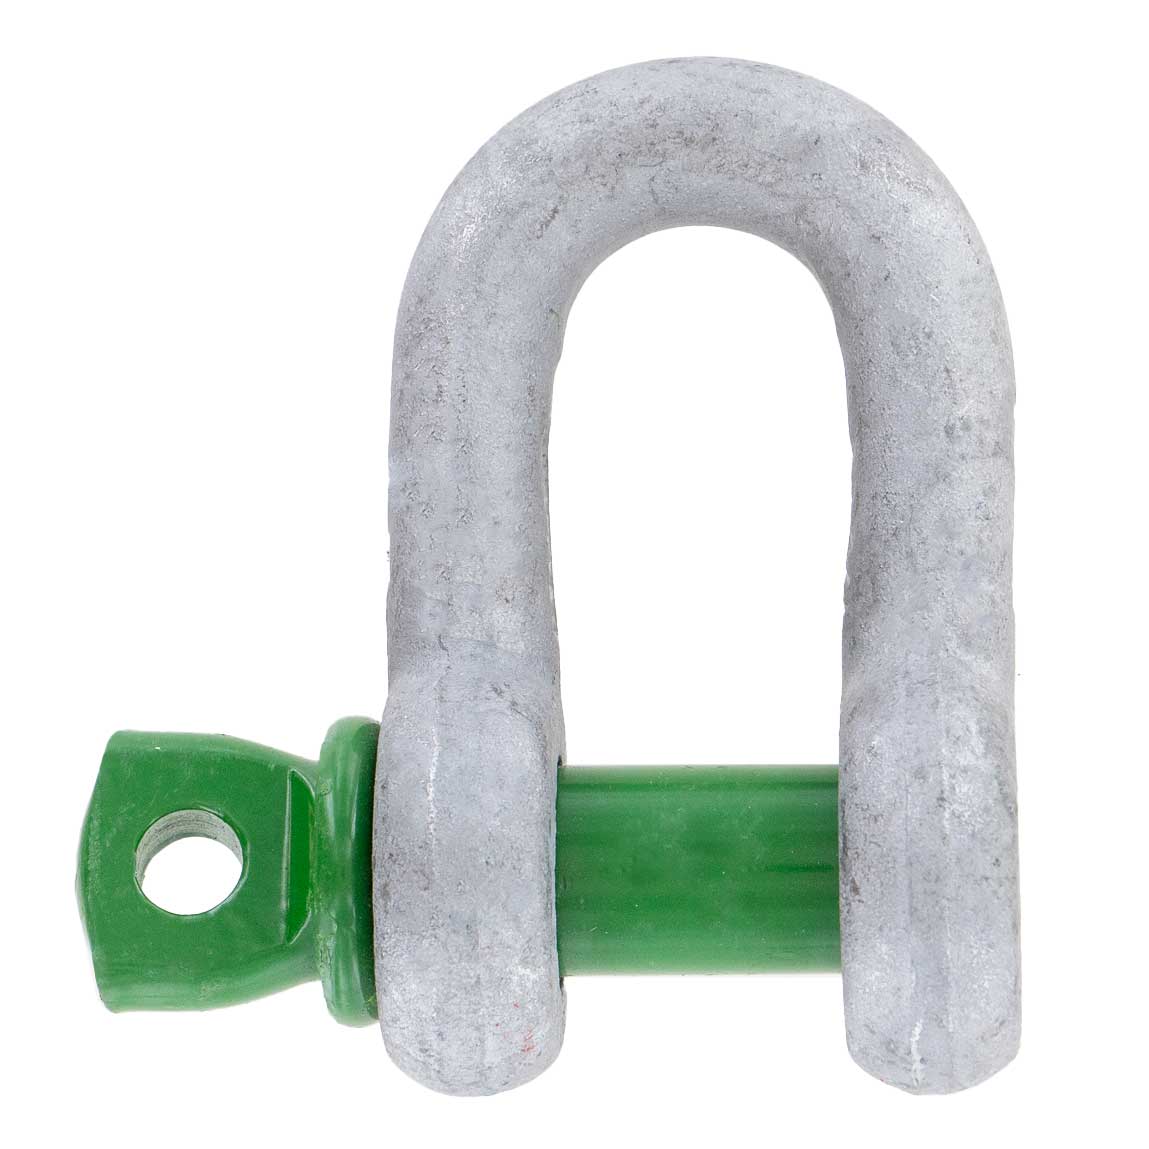 1-1/4" Van Beest Green Pin® Screw Pin Chain Shackle | G-4151 - 12 Ton rear view